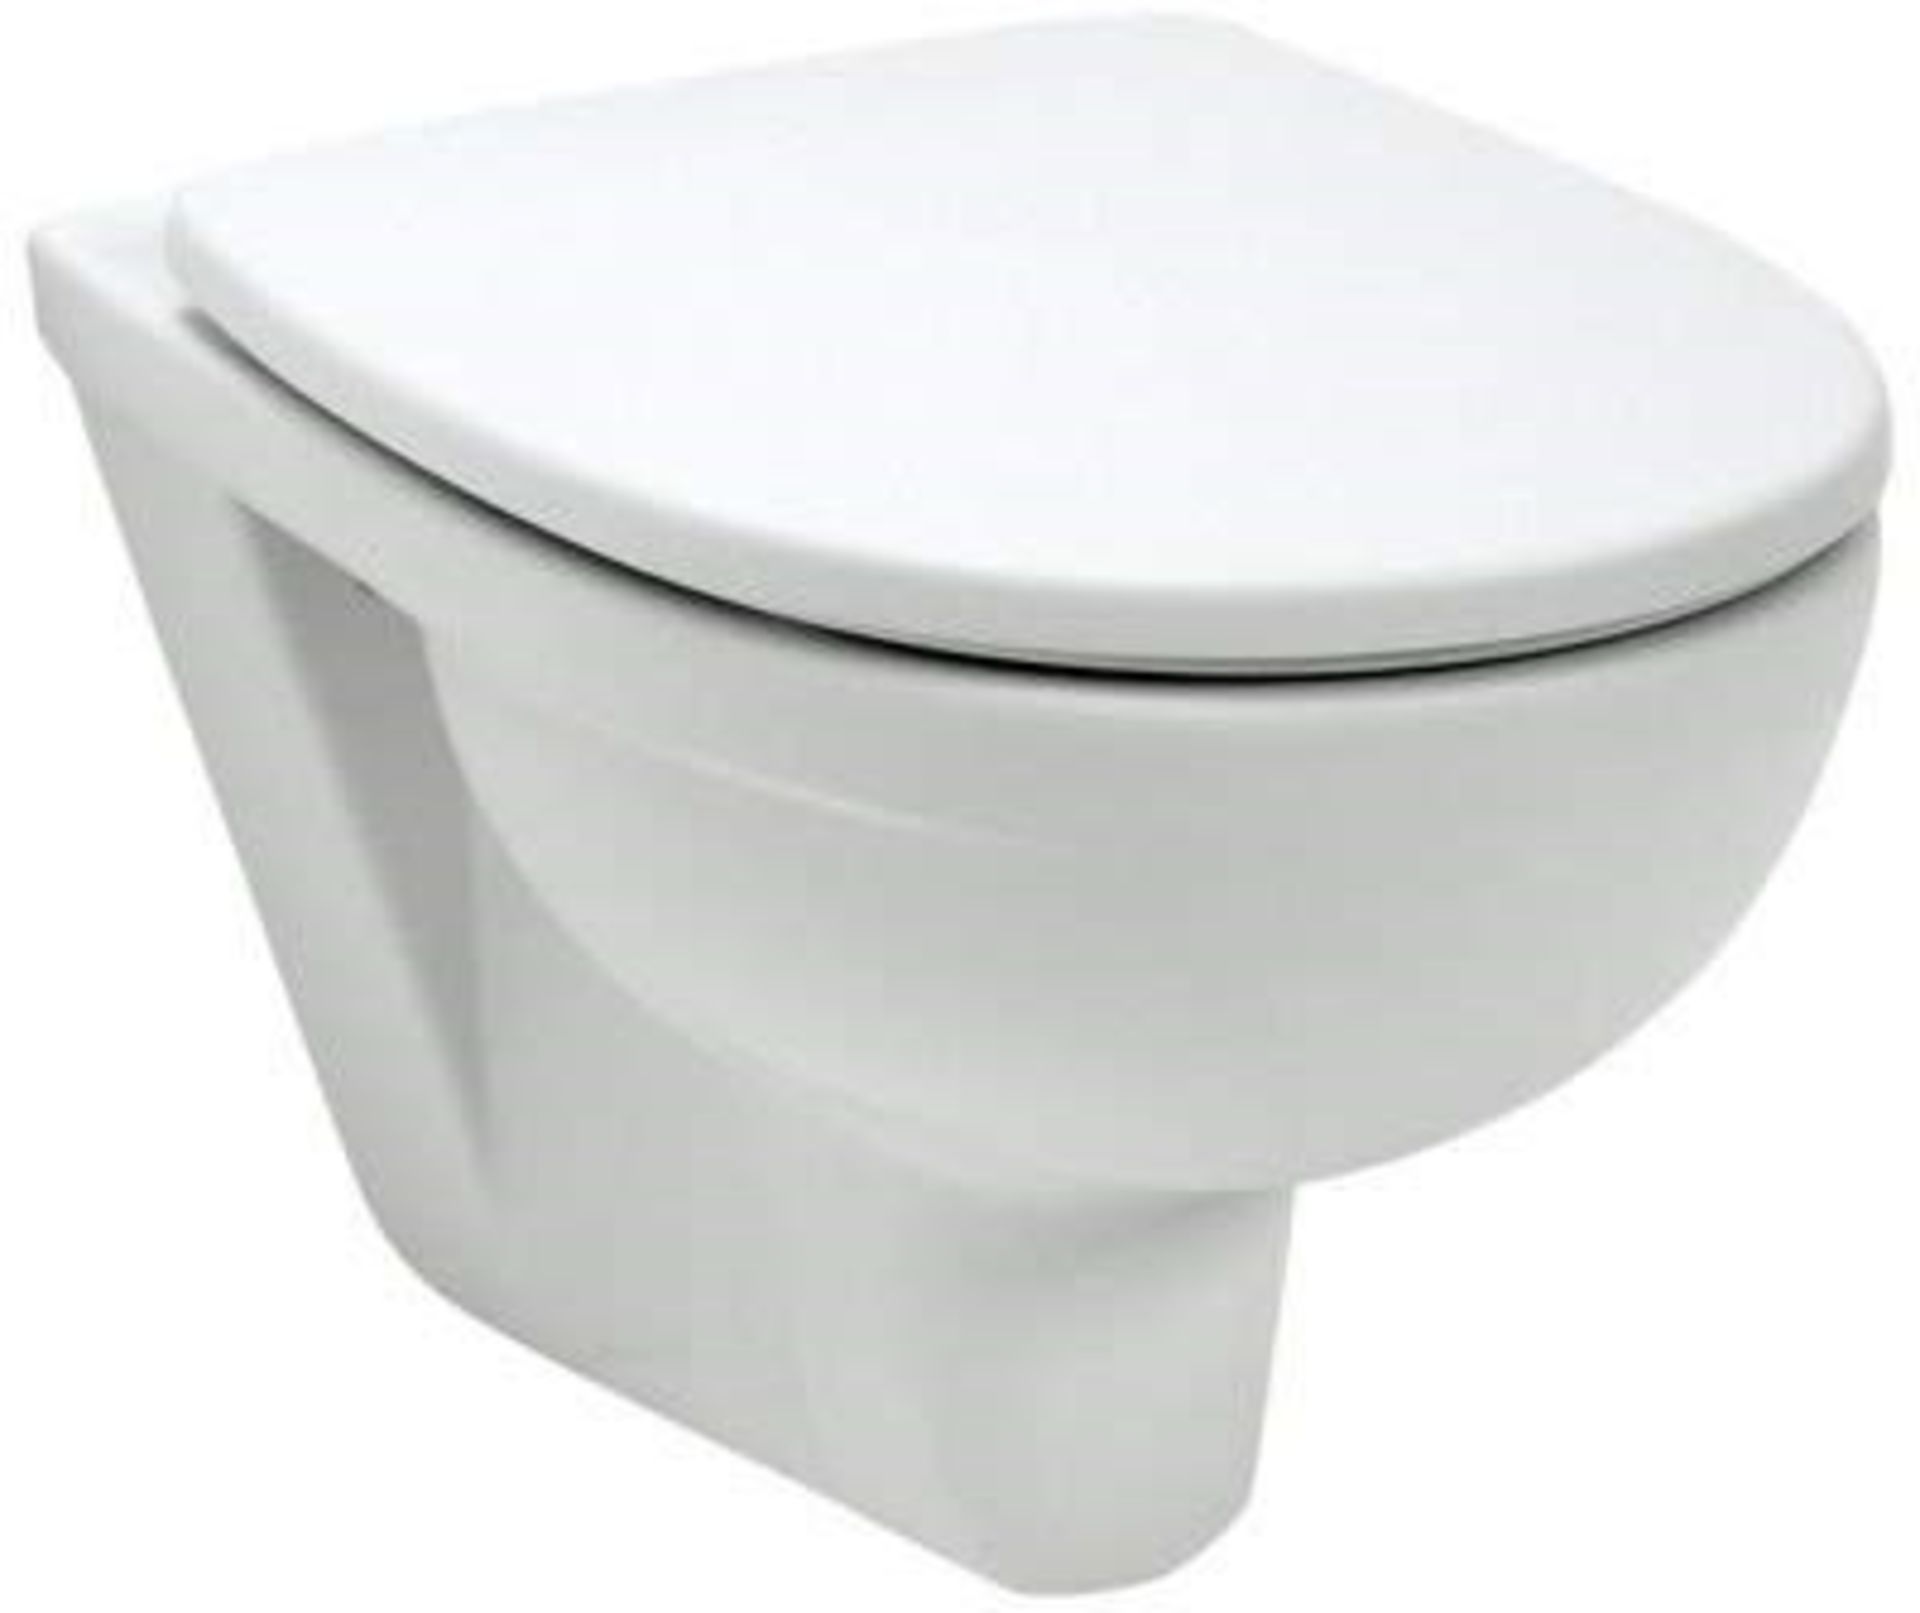 Brand New Twyford White Refresh Wall Hung WC Pan, Toilet.Seat not included.Twyford White Refresh Wal - Image 2 of 2